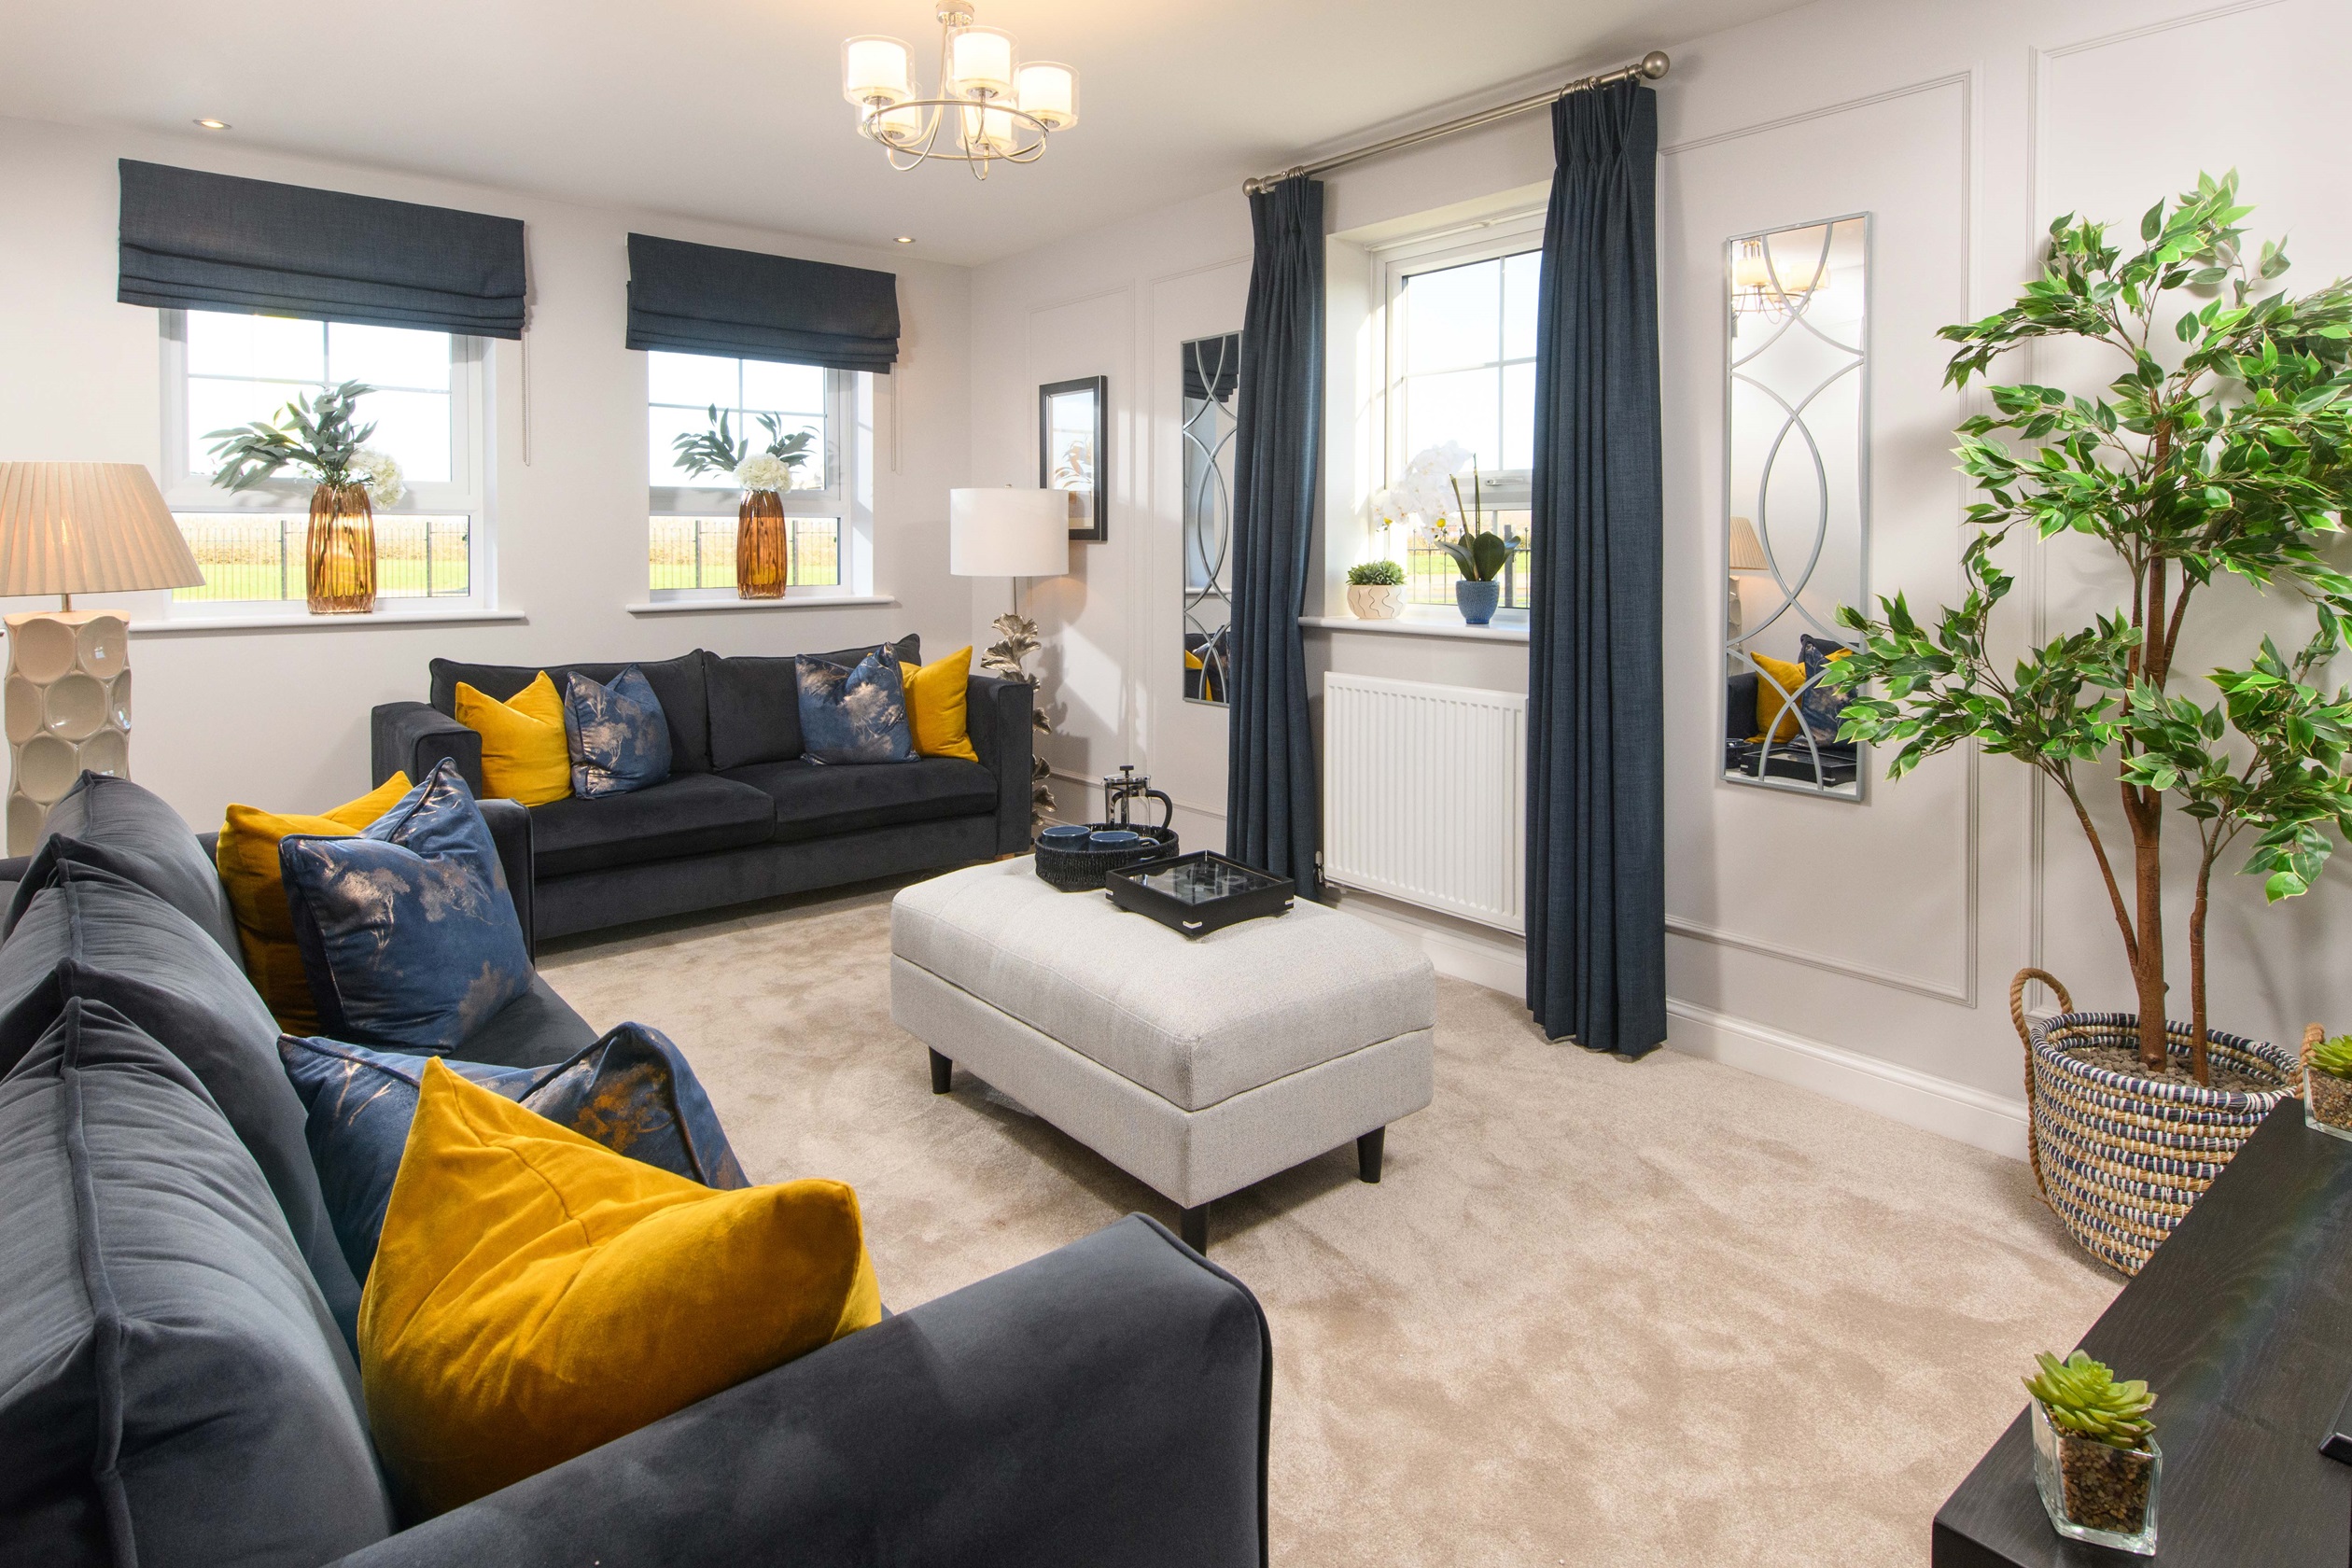 Property 3 of 8. Hesketh Show Home